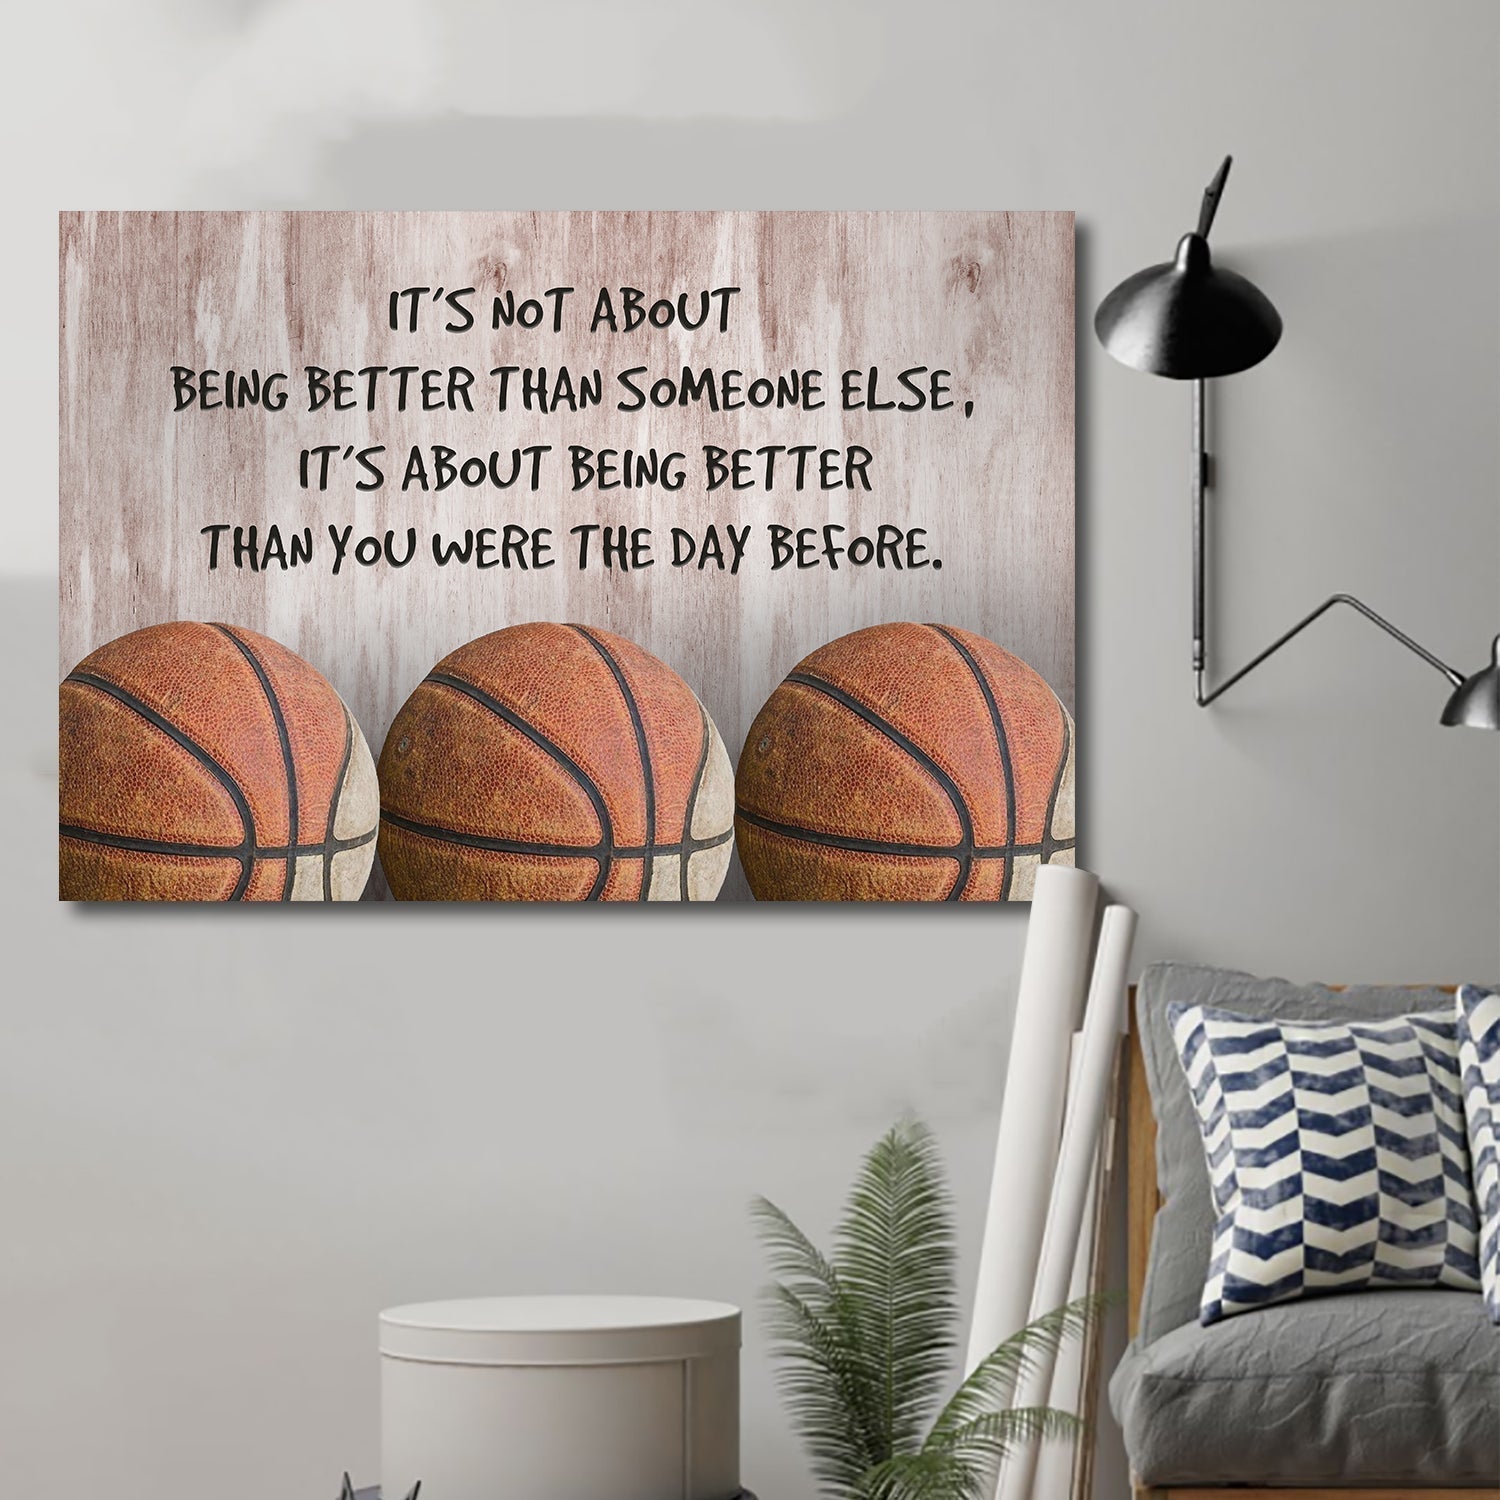 All Sport of customizable basketball poster canvas - It is not about better than someone else, It is about being better than you were the day before